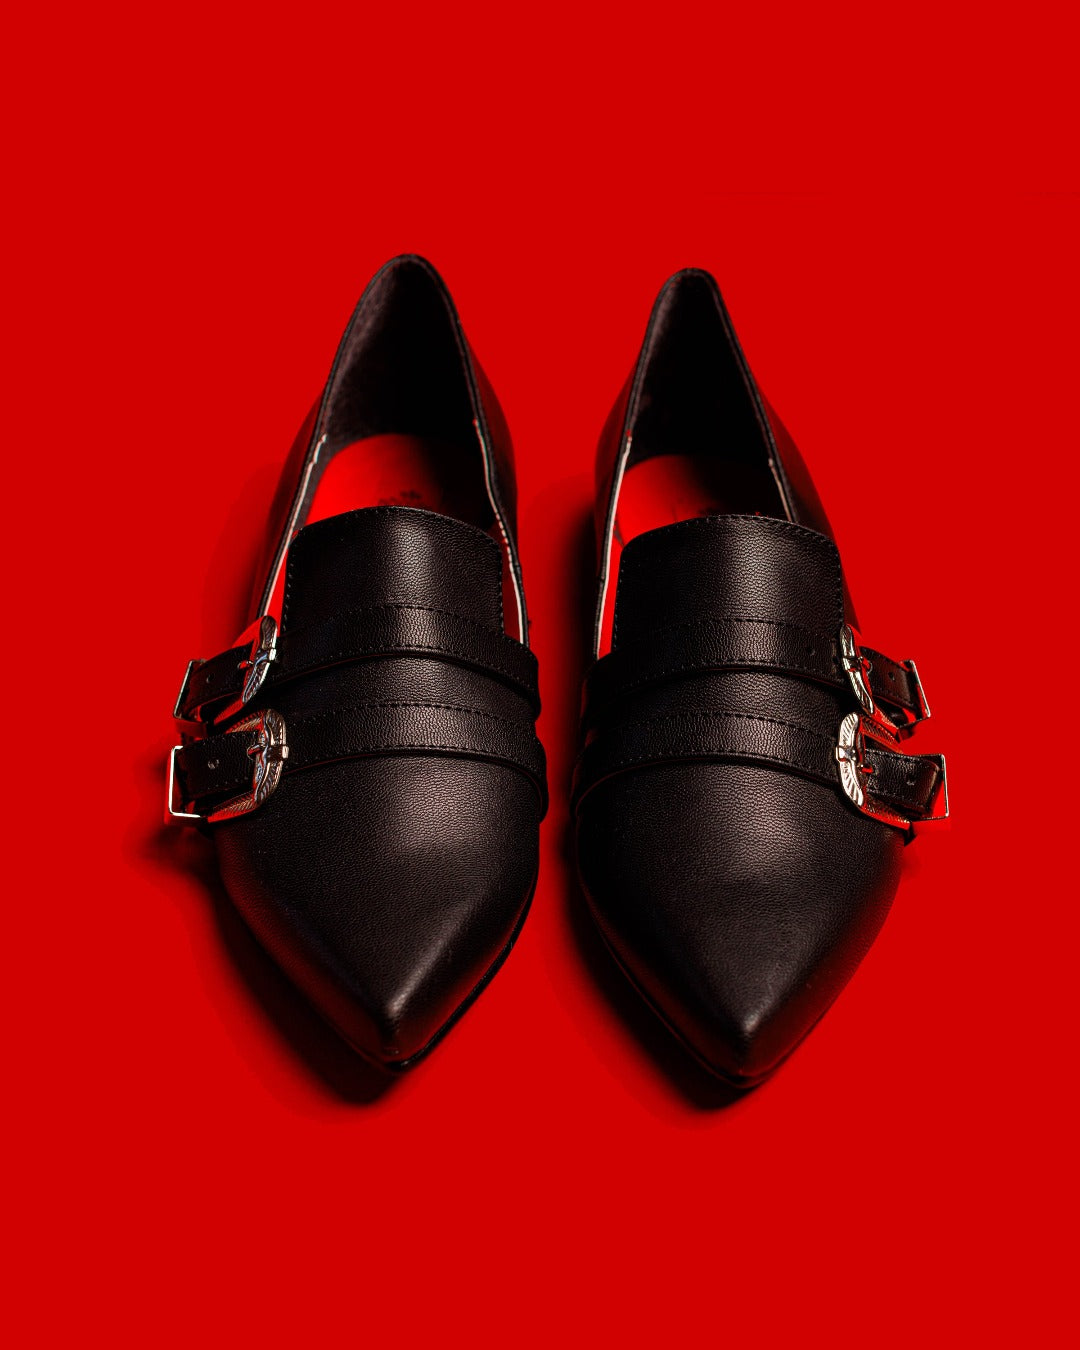 Front view of the Antonella flat shoes matte against a red background.